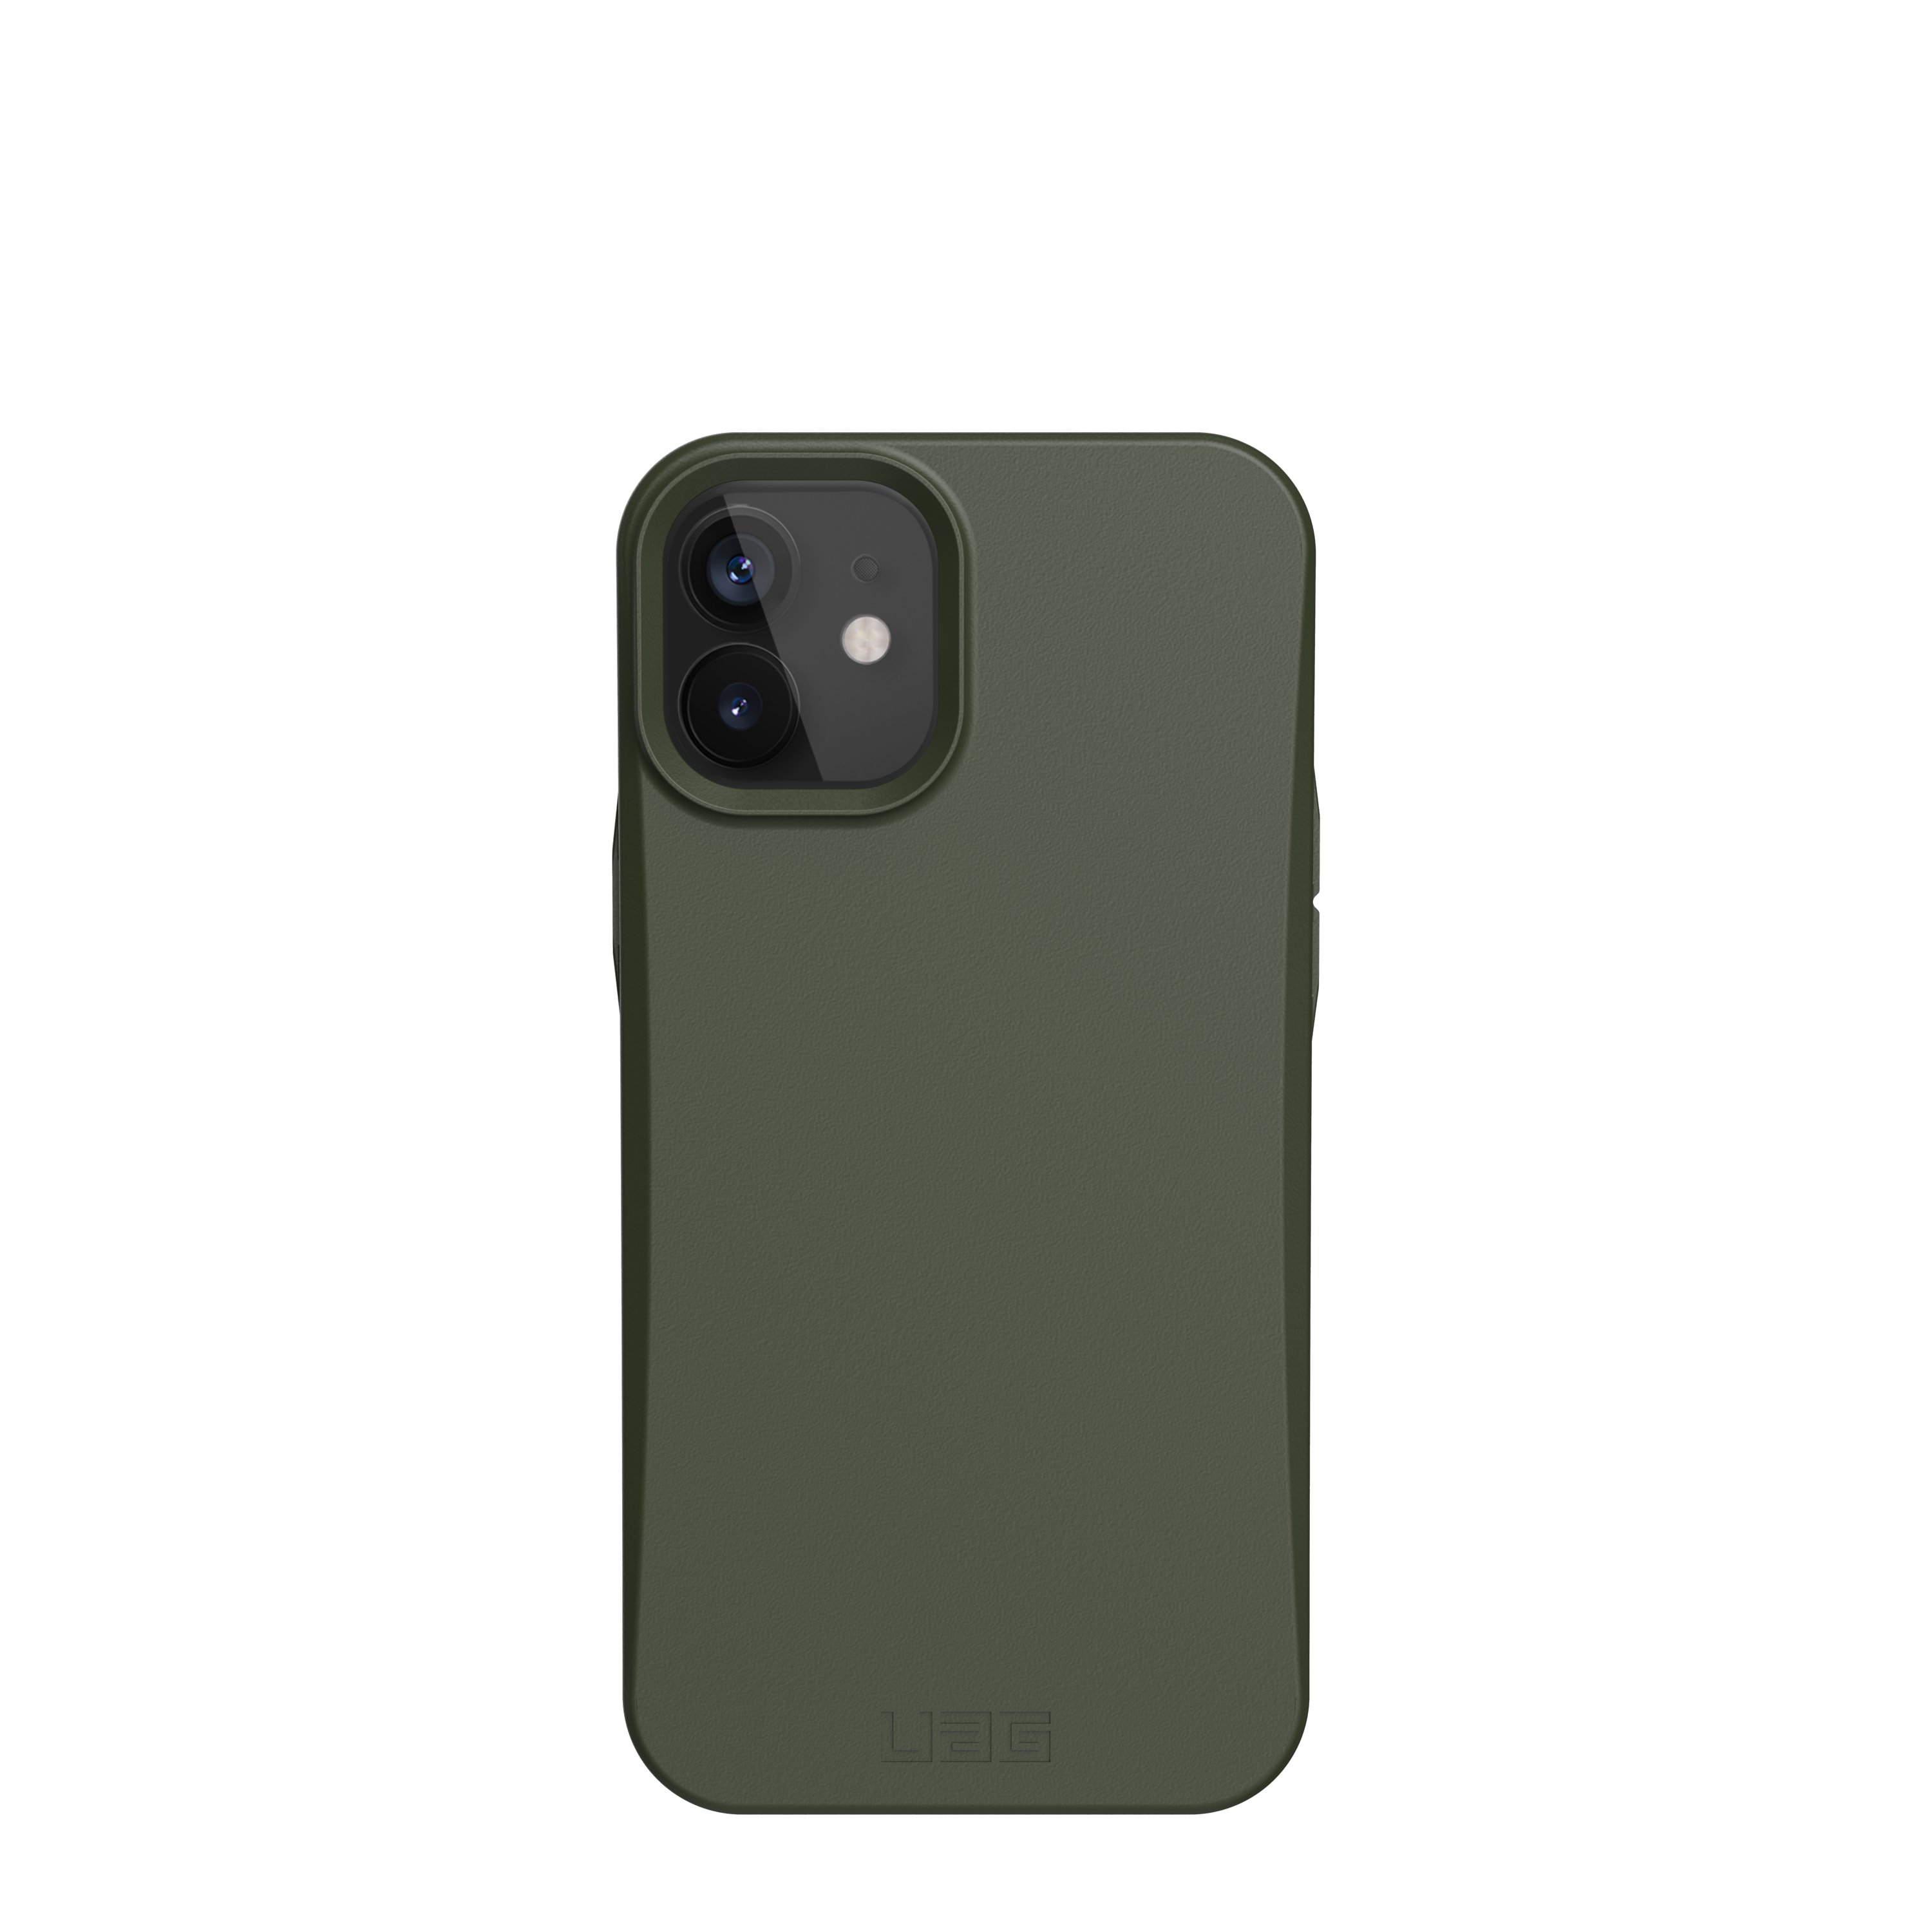 Outback Biodegradable Case iPhone 12 Mini Olive